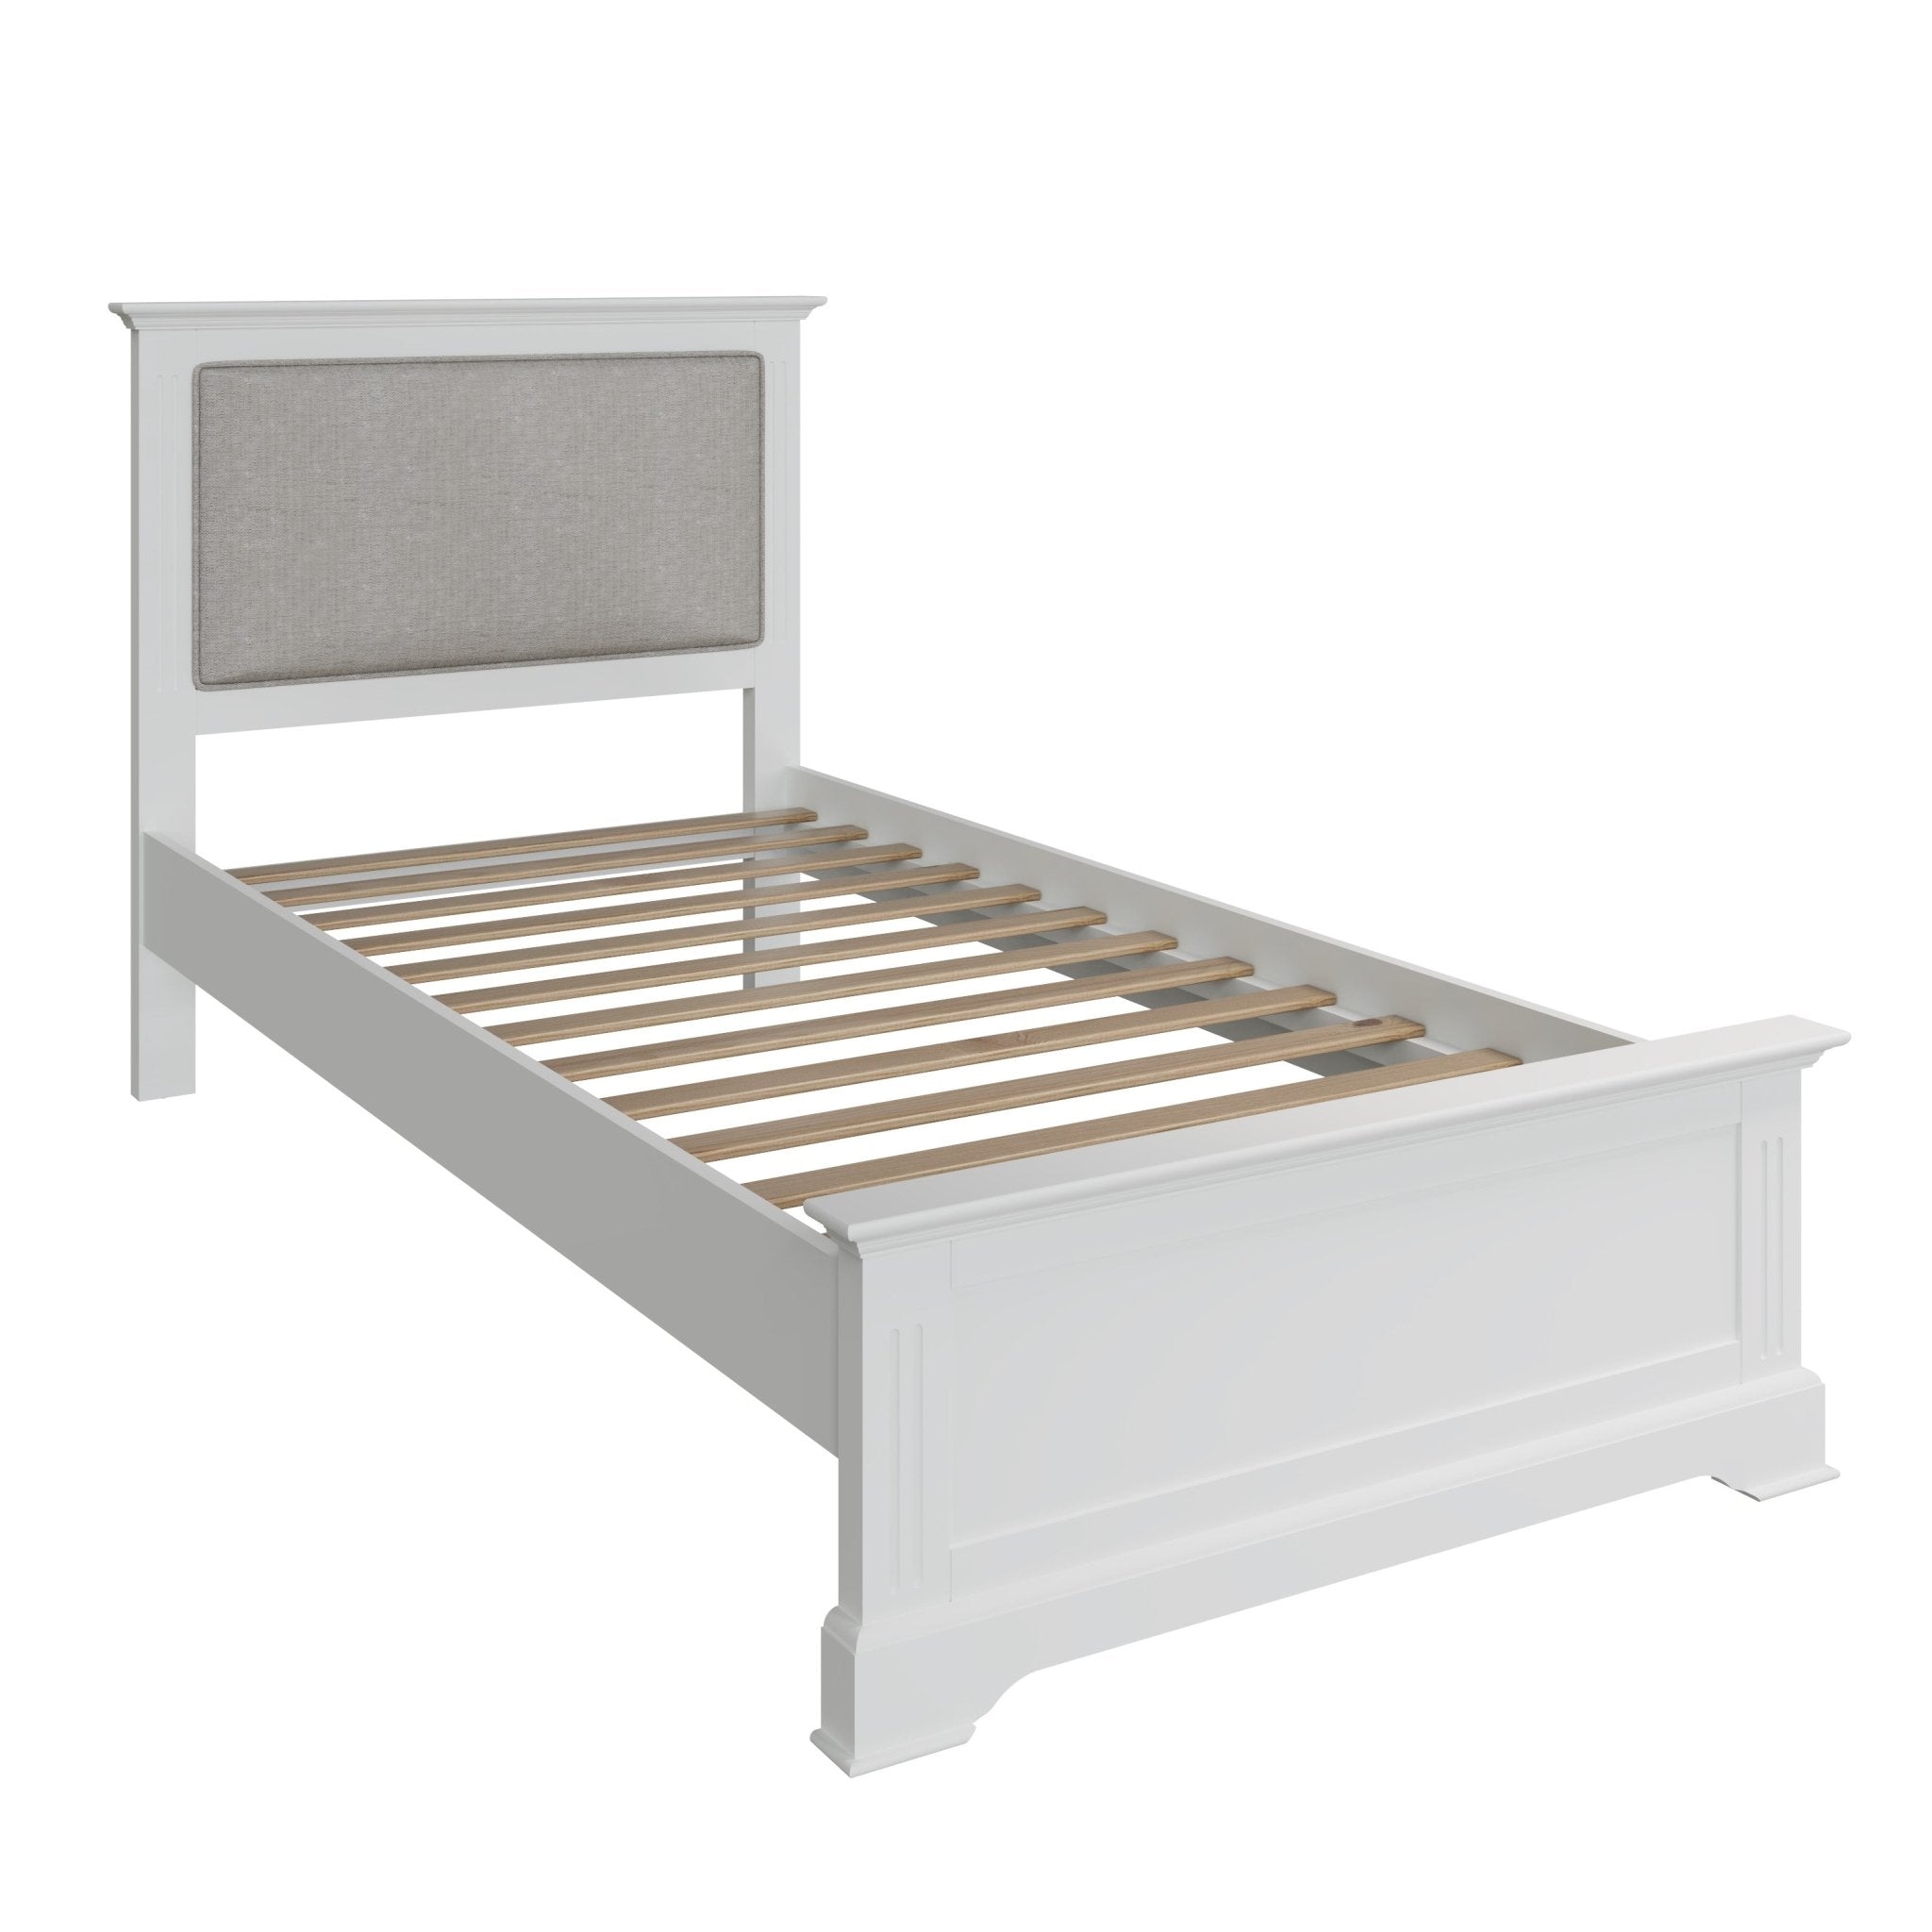 Snowdrop White Painted Single Bed Frame - Duck Barn Interiors